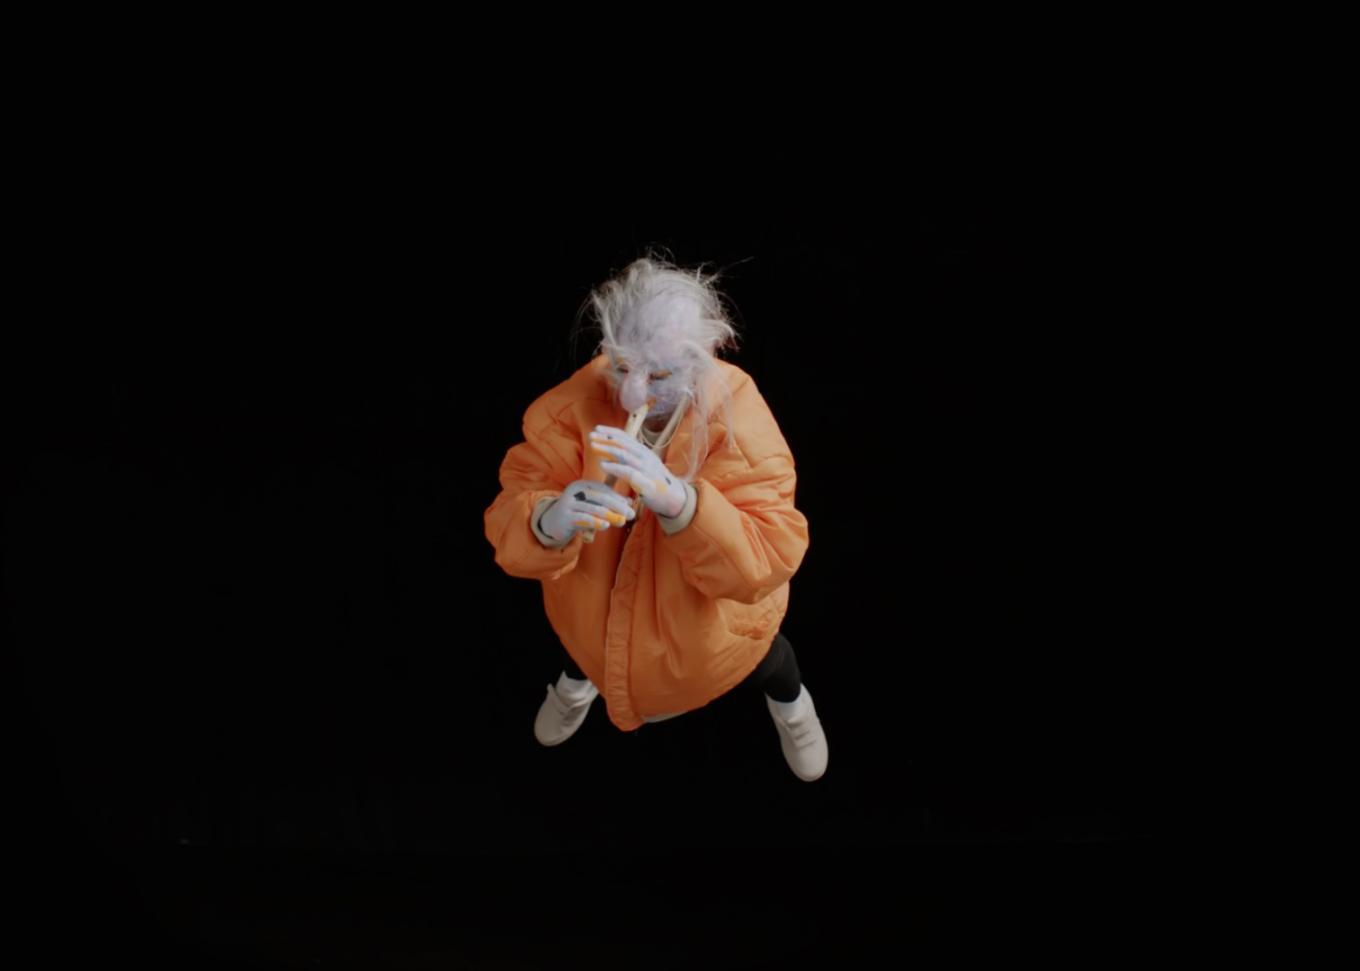 Tori WrÃ¥nes, Ancient Baby, 2017, Video projection, sound variable, Courtesy of the artists and Carl Freedman Gallery